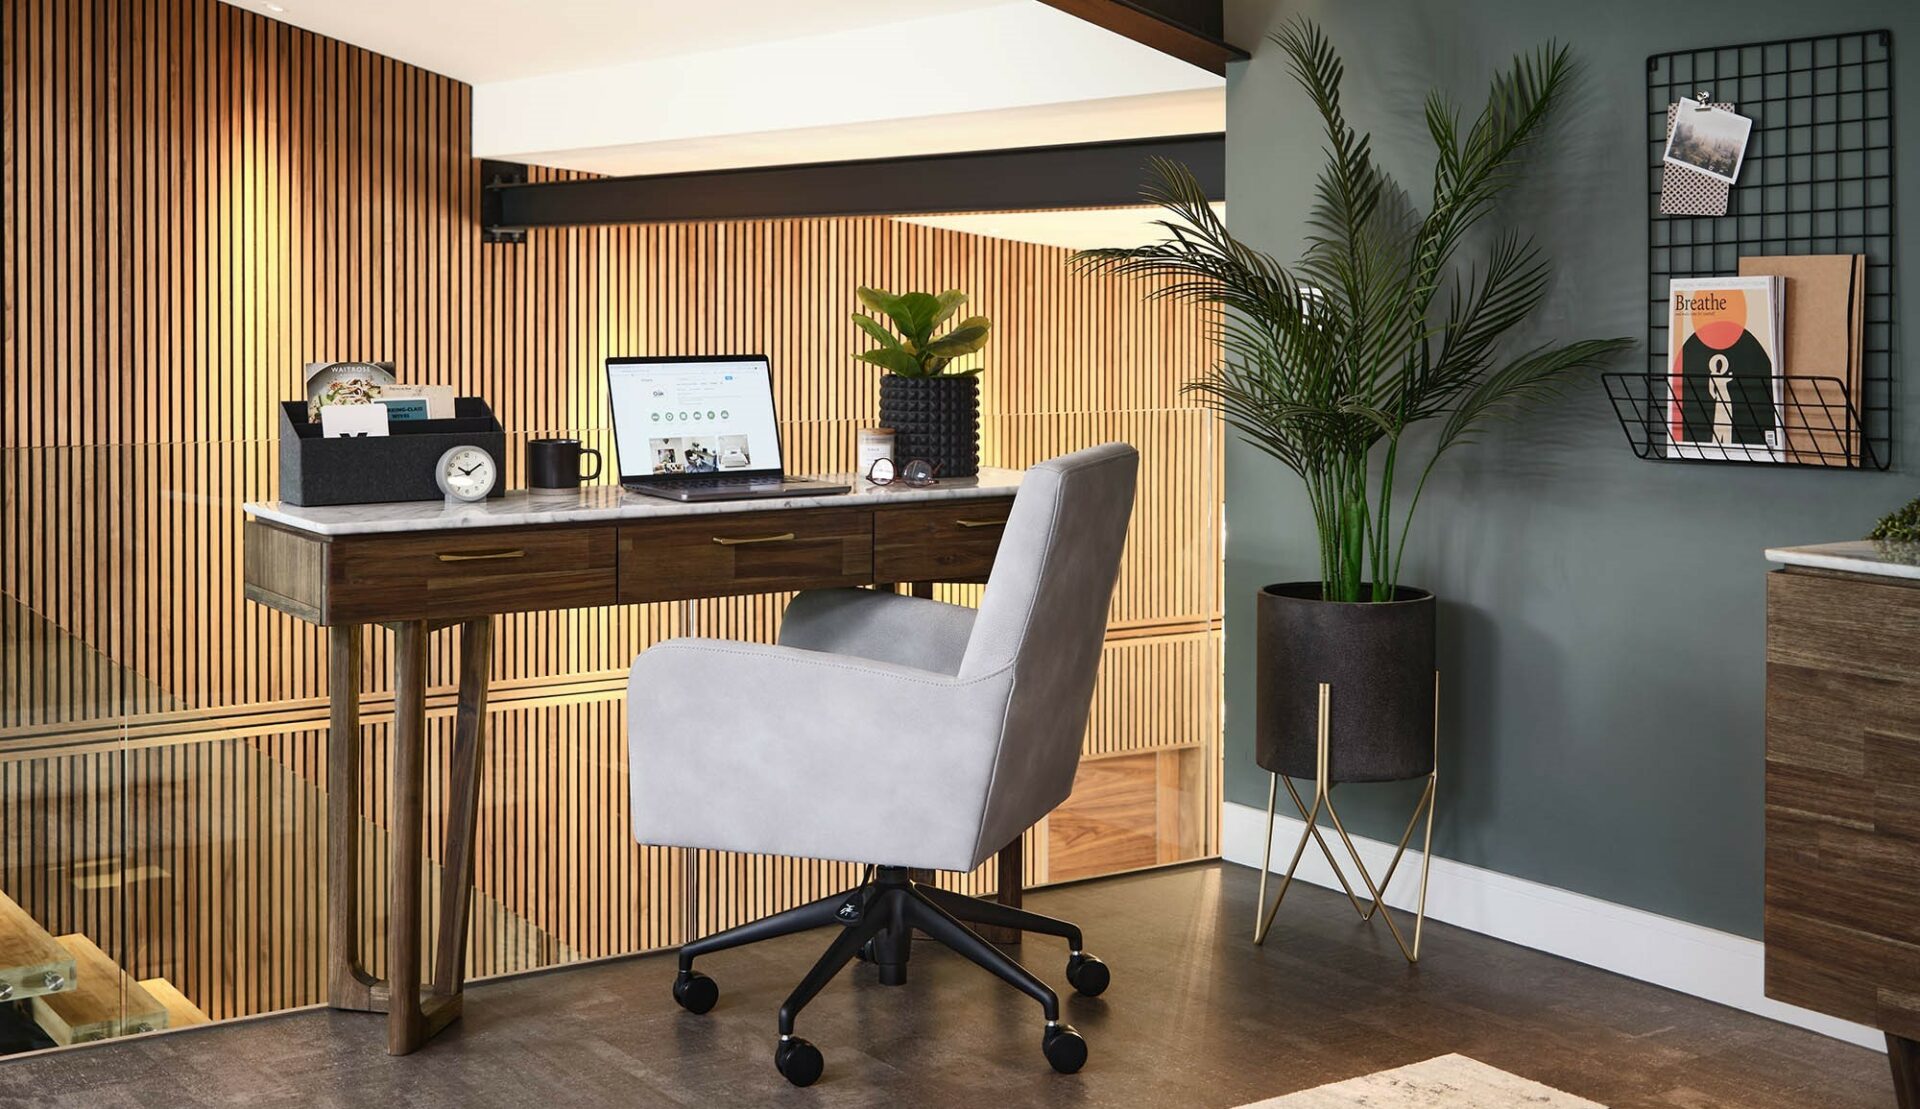 A desk and office chair-office furniture-wooden desk with drawers and upholstered office chair